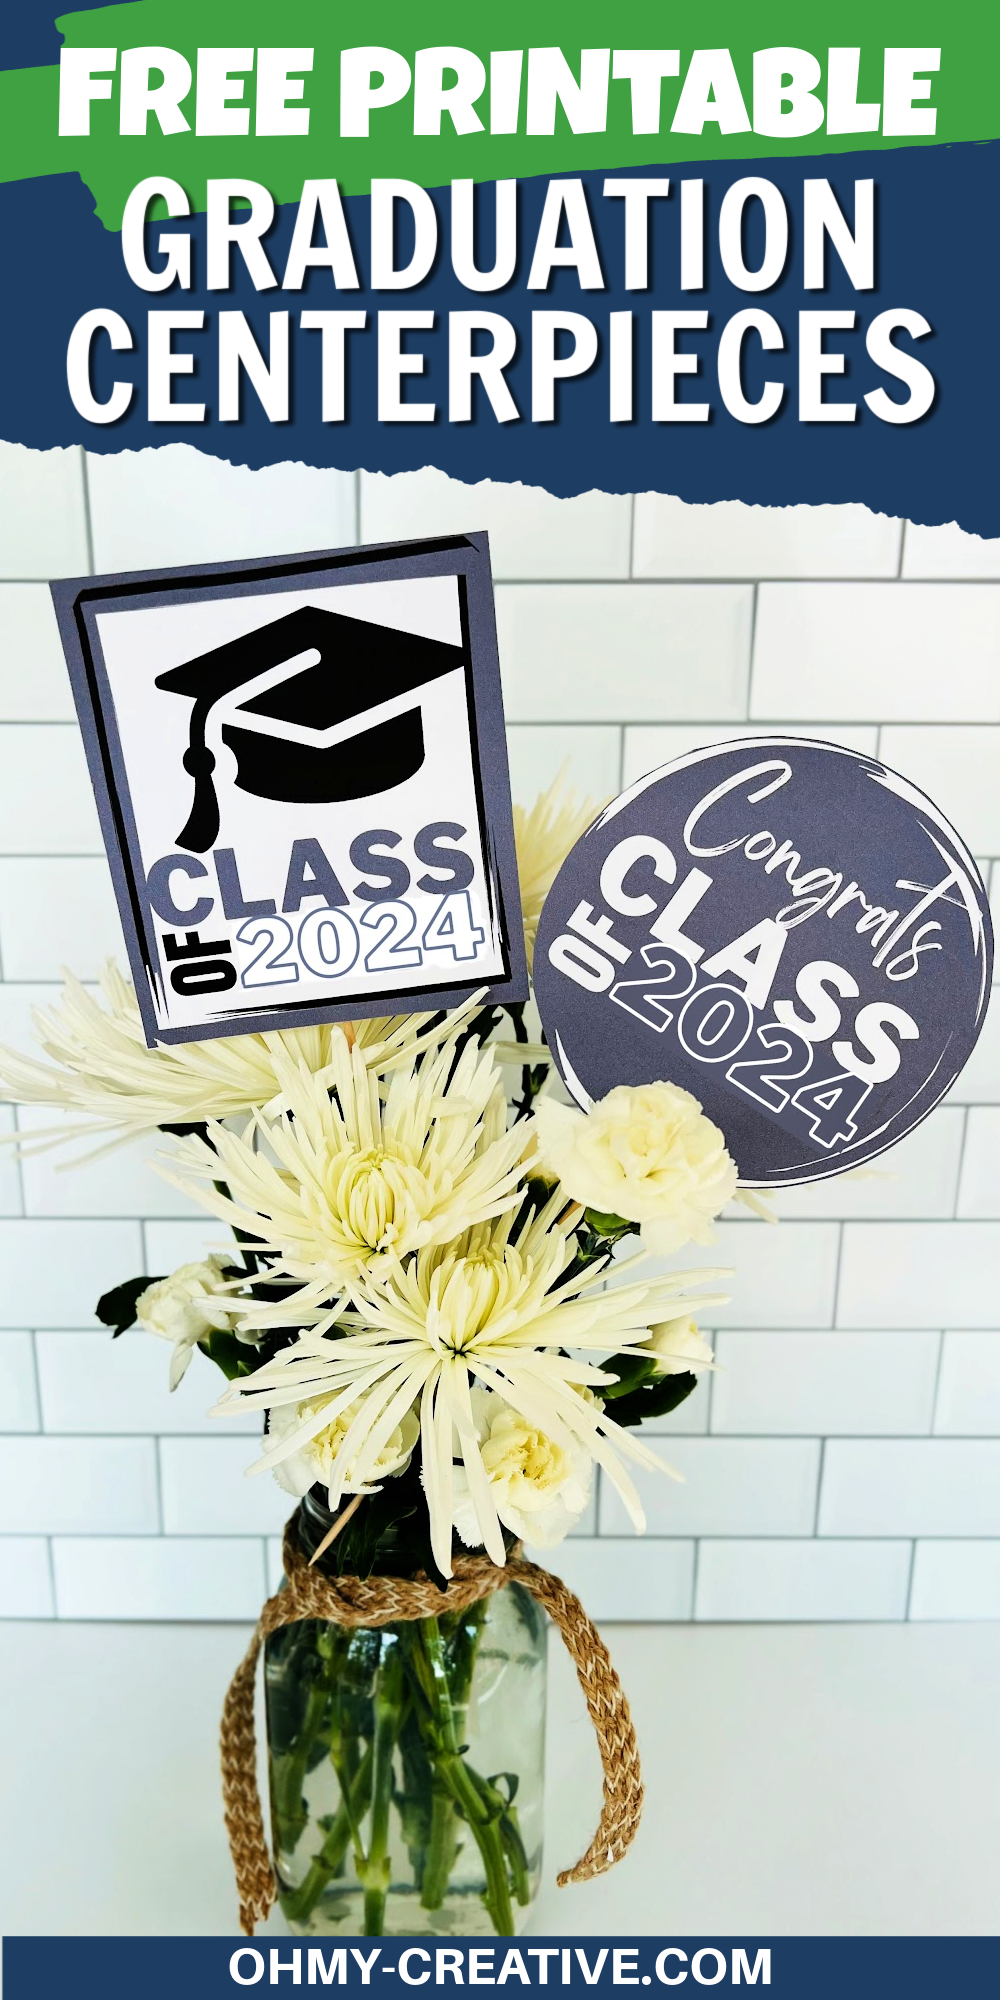 Simple Graduation Centerpieces With Free Printable